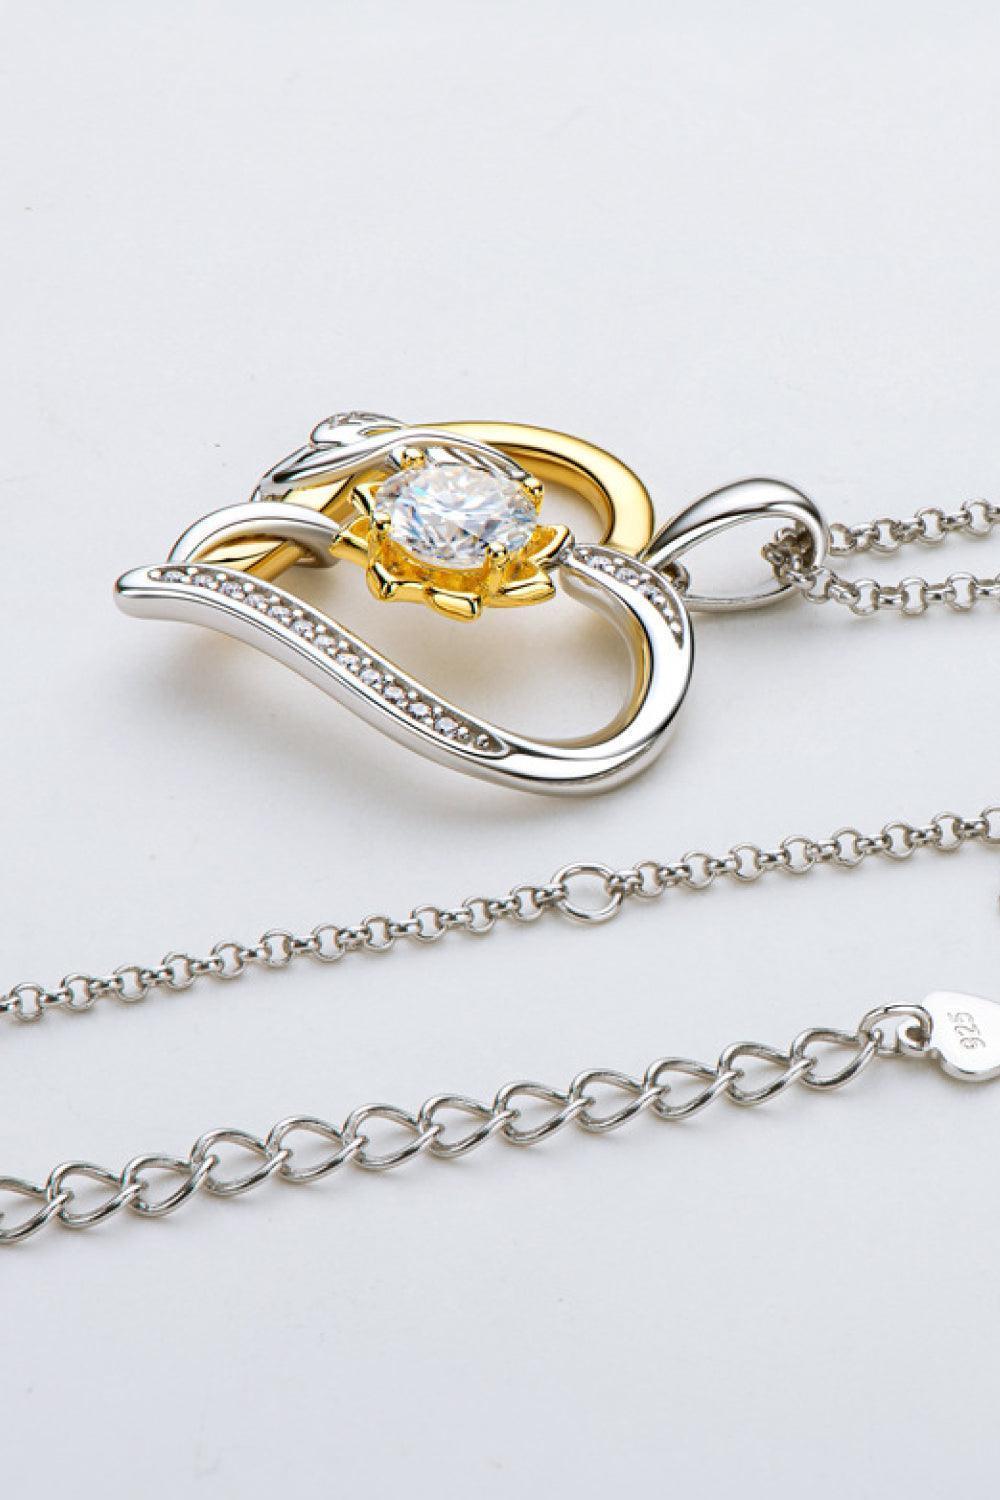 1 Carat Moissanite Gold And Platinum-Plated Heart Necklace - MXSTUDIO.COM